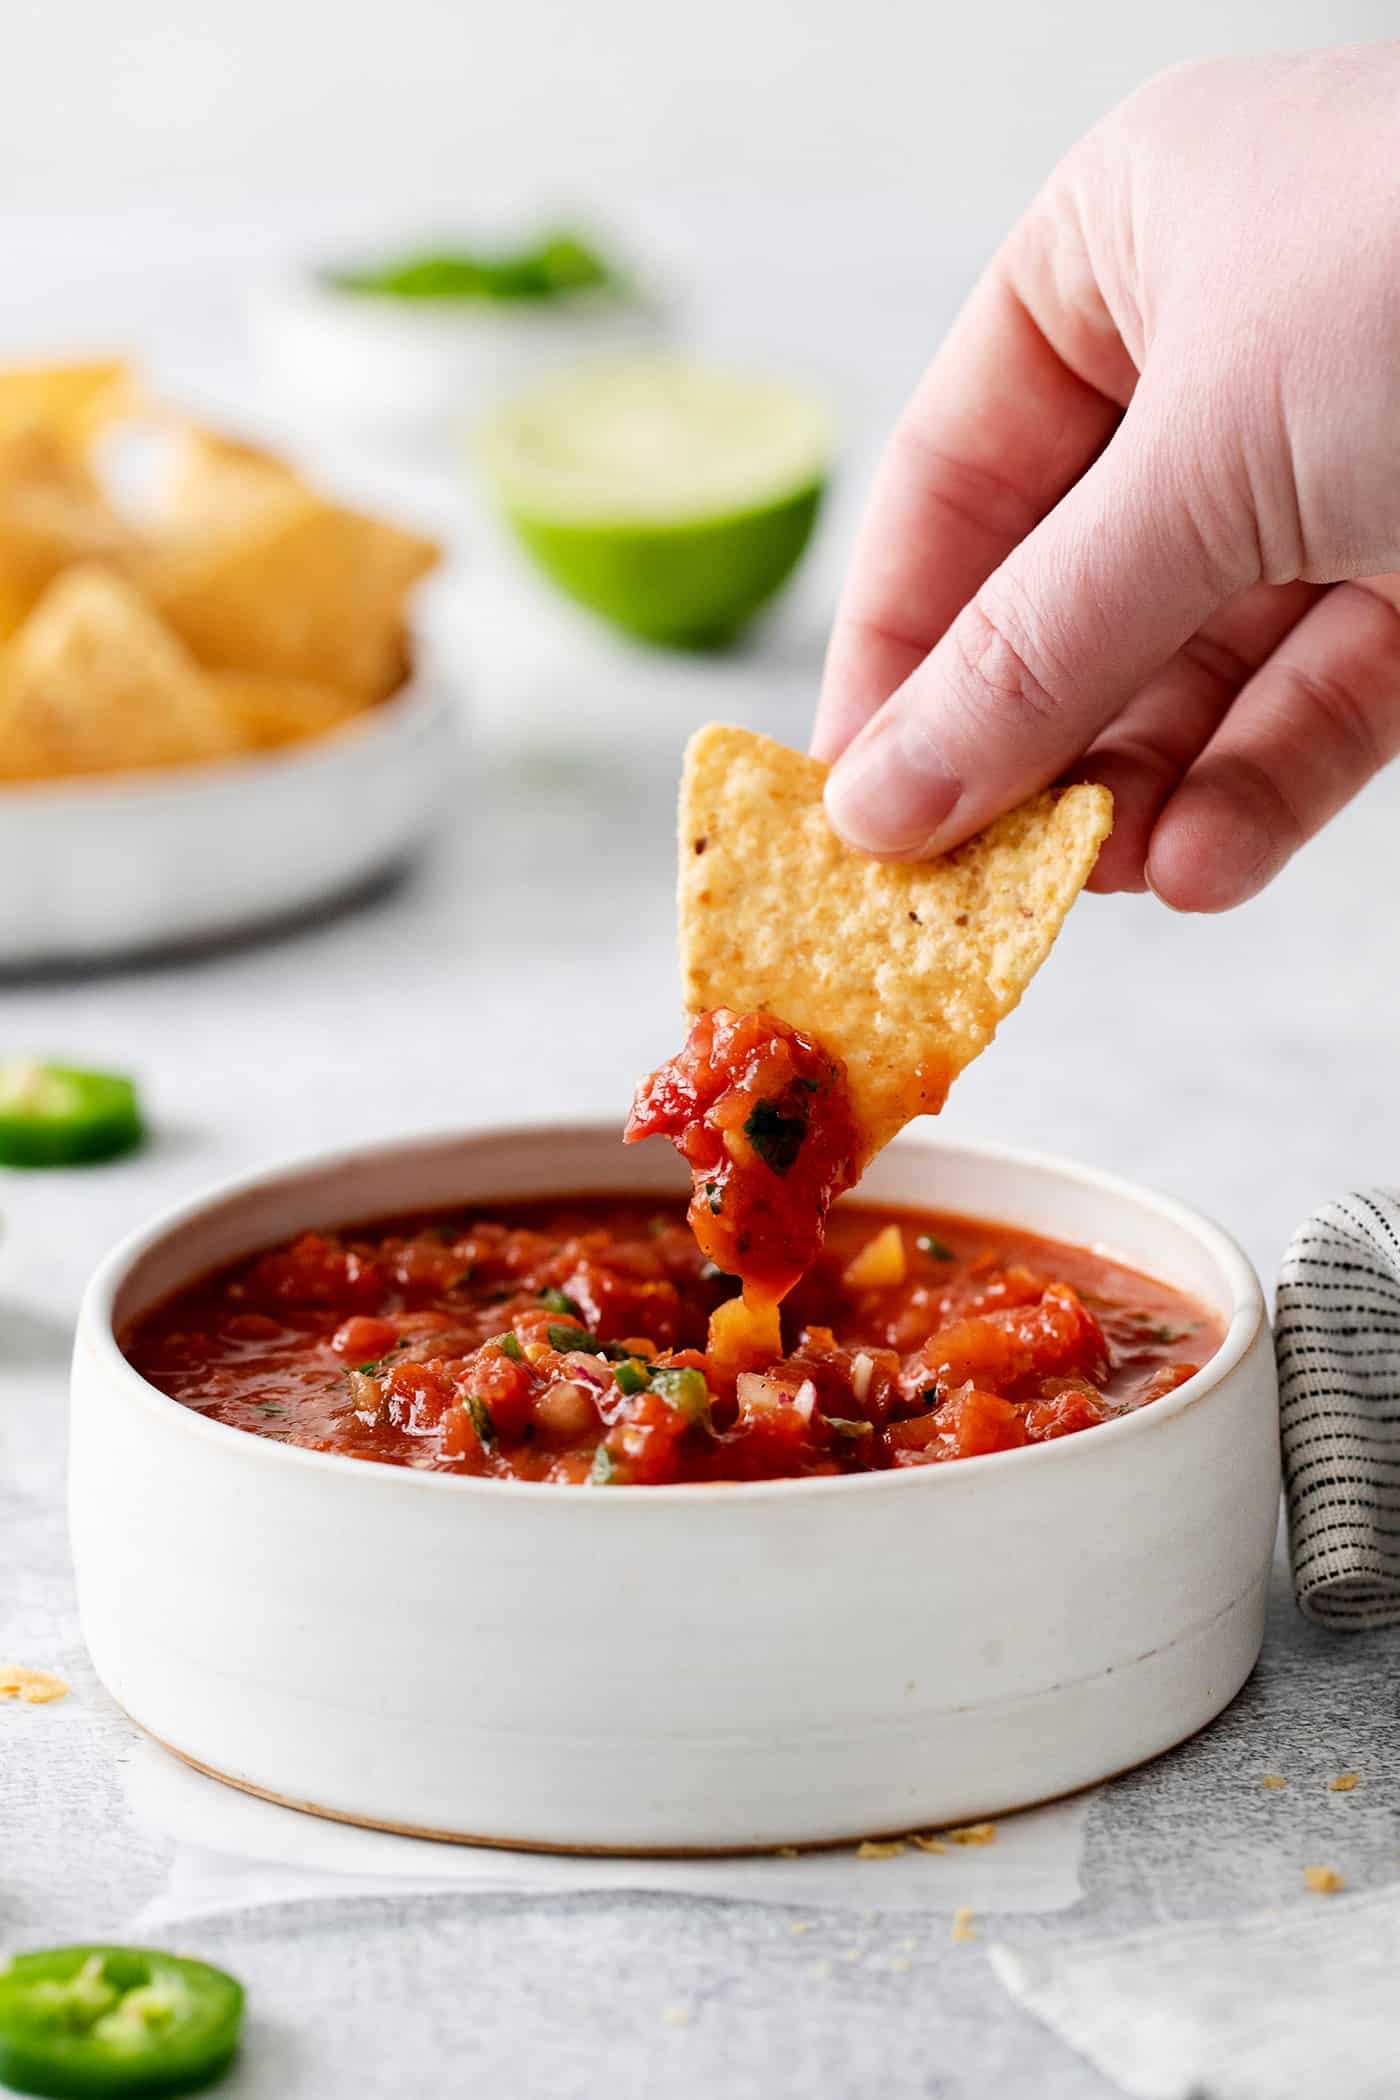 A hand holding a chip dipped in salsa